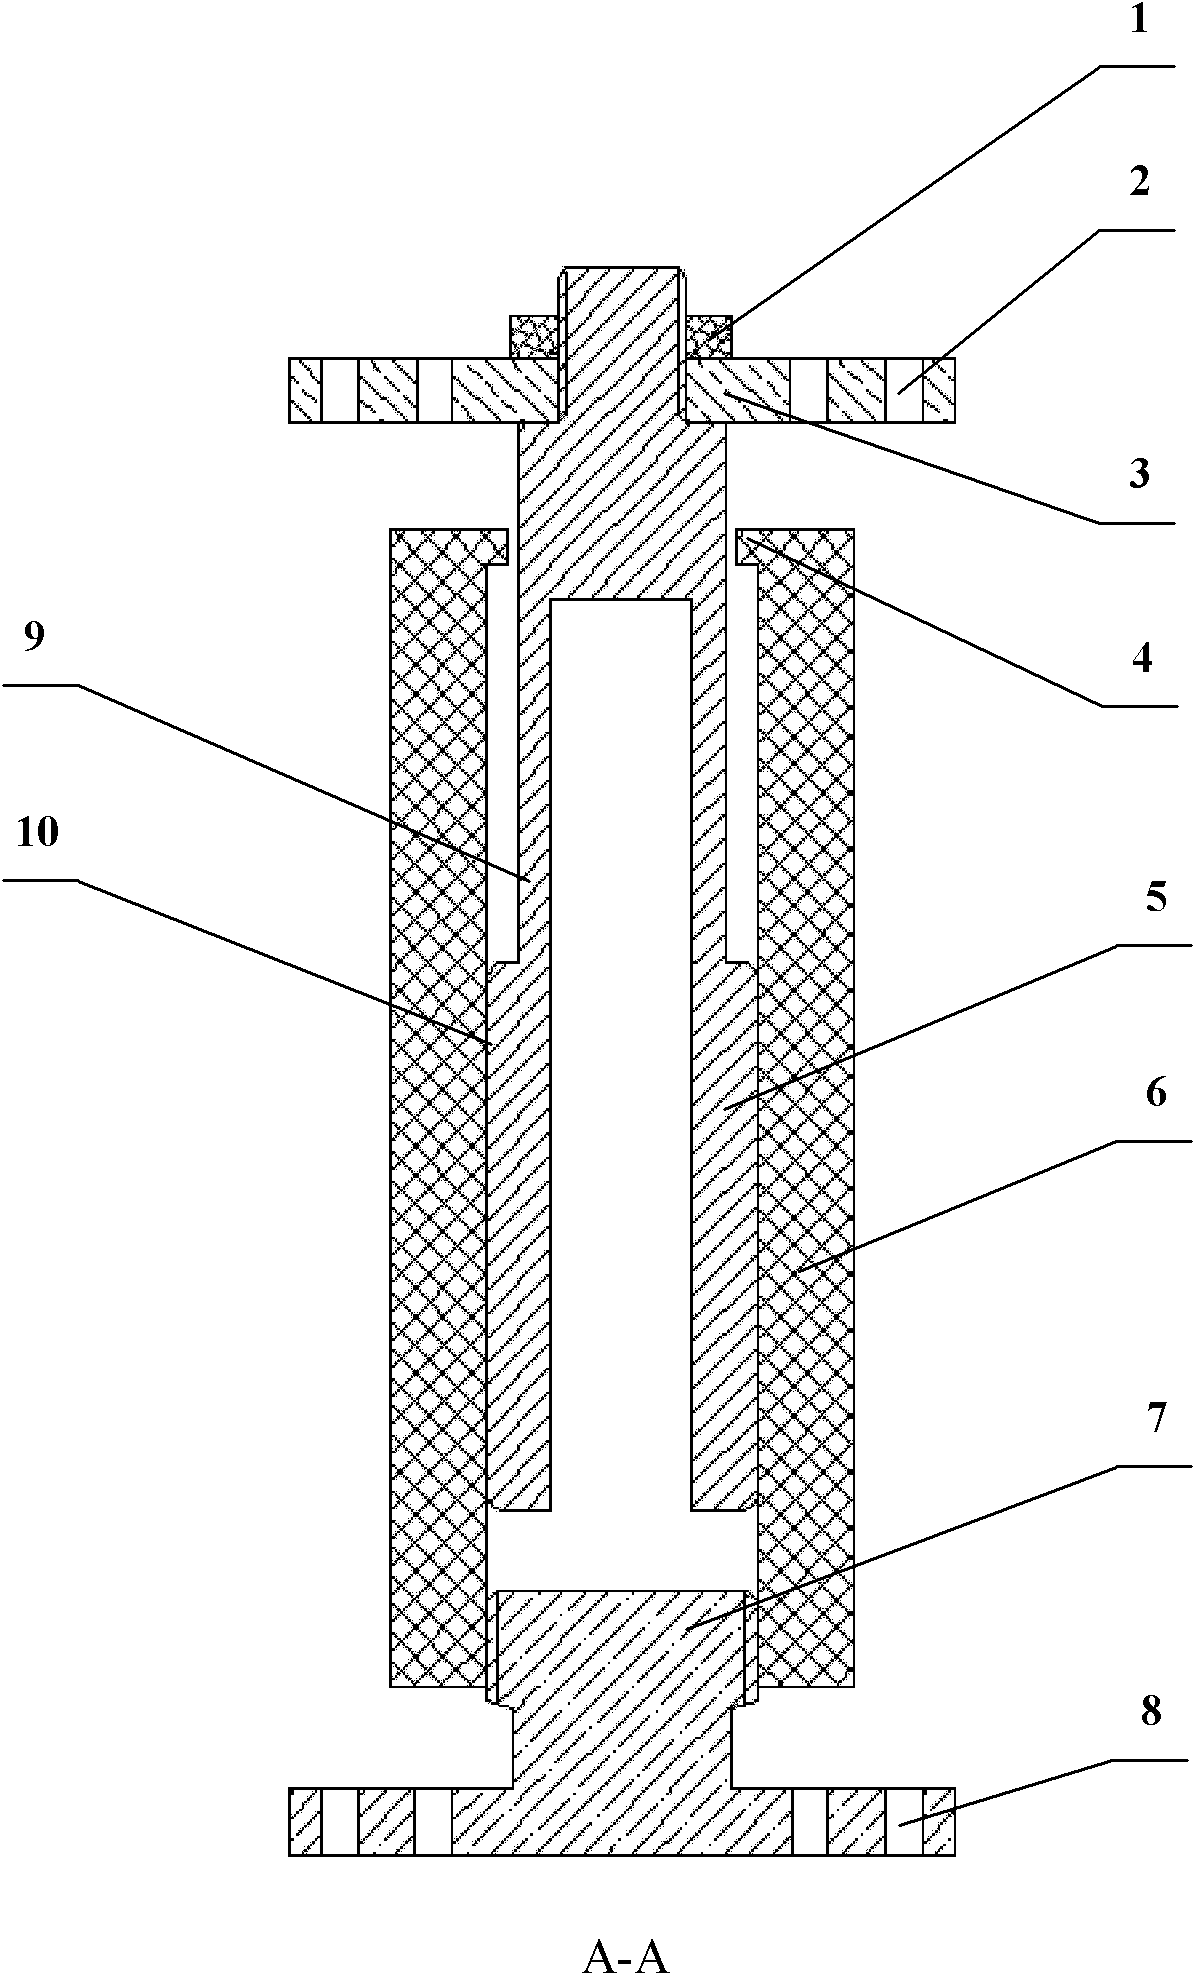 Active self-adaptative constant-resistance lengthener for prestress anchor cable